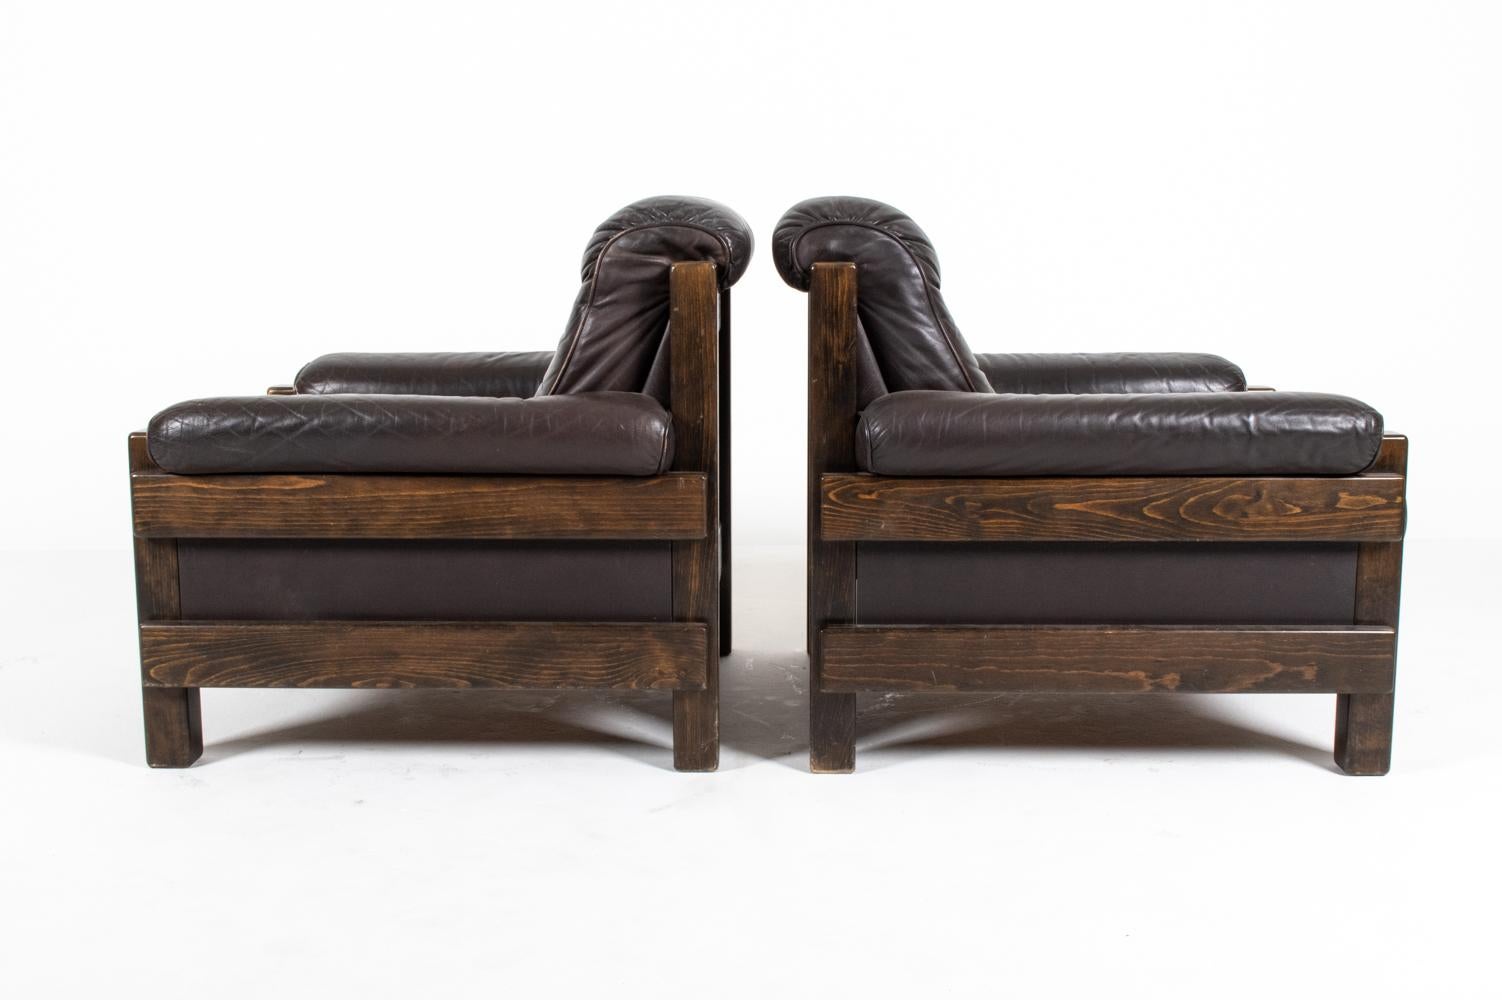 Pair of Swedish Mid-Century Tufted Leather Lounge Chairs by Ikea, 1970's For Sale 4